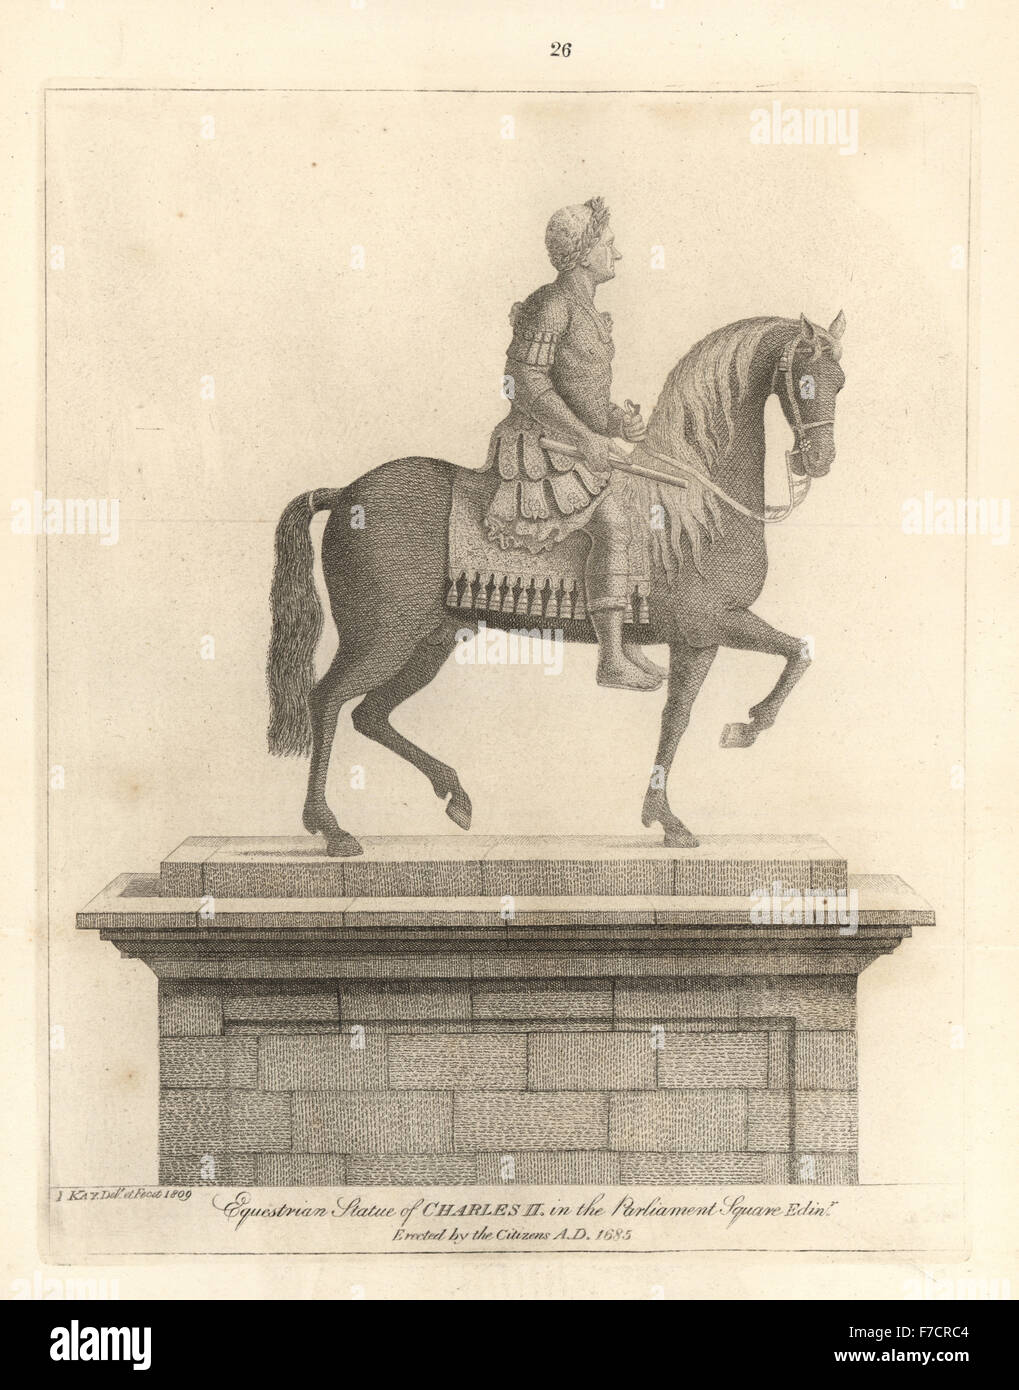 Equestrian statue of King Charles II as a Roman emperor, erected in Parliament Square, 1785. Copperplate engraving by John Kay from A Series of Original Portraits and Caricature Etchings, Hugh Paton, Edinburgh, 1842. Stock Photo